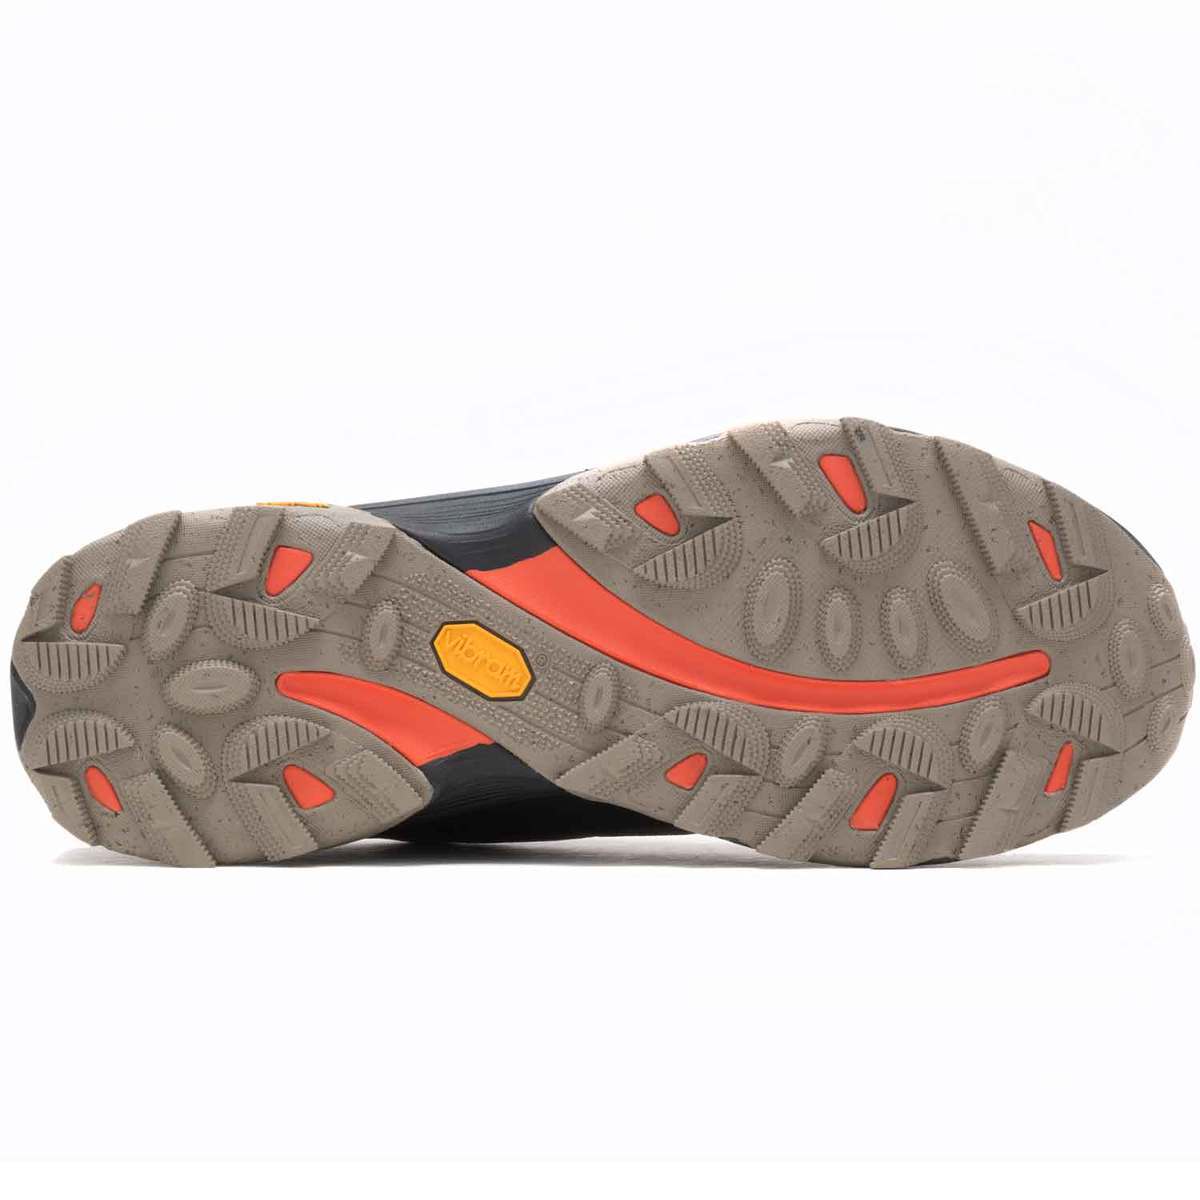 Merrell Men's Moab Speed Low Hiking Shoes | Sportsman's Warehouse